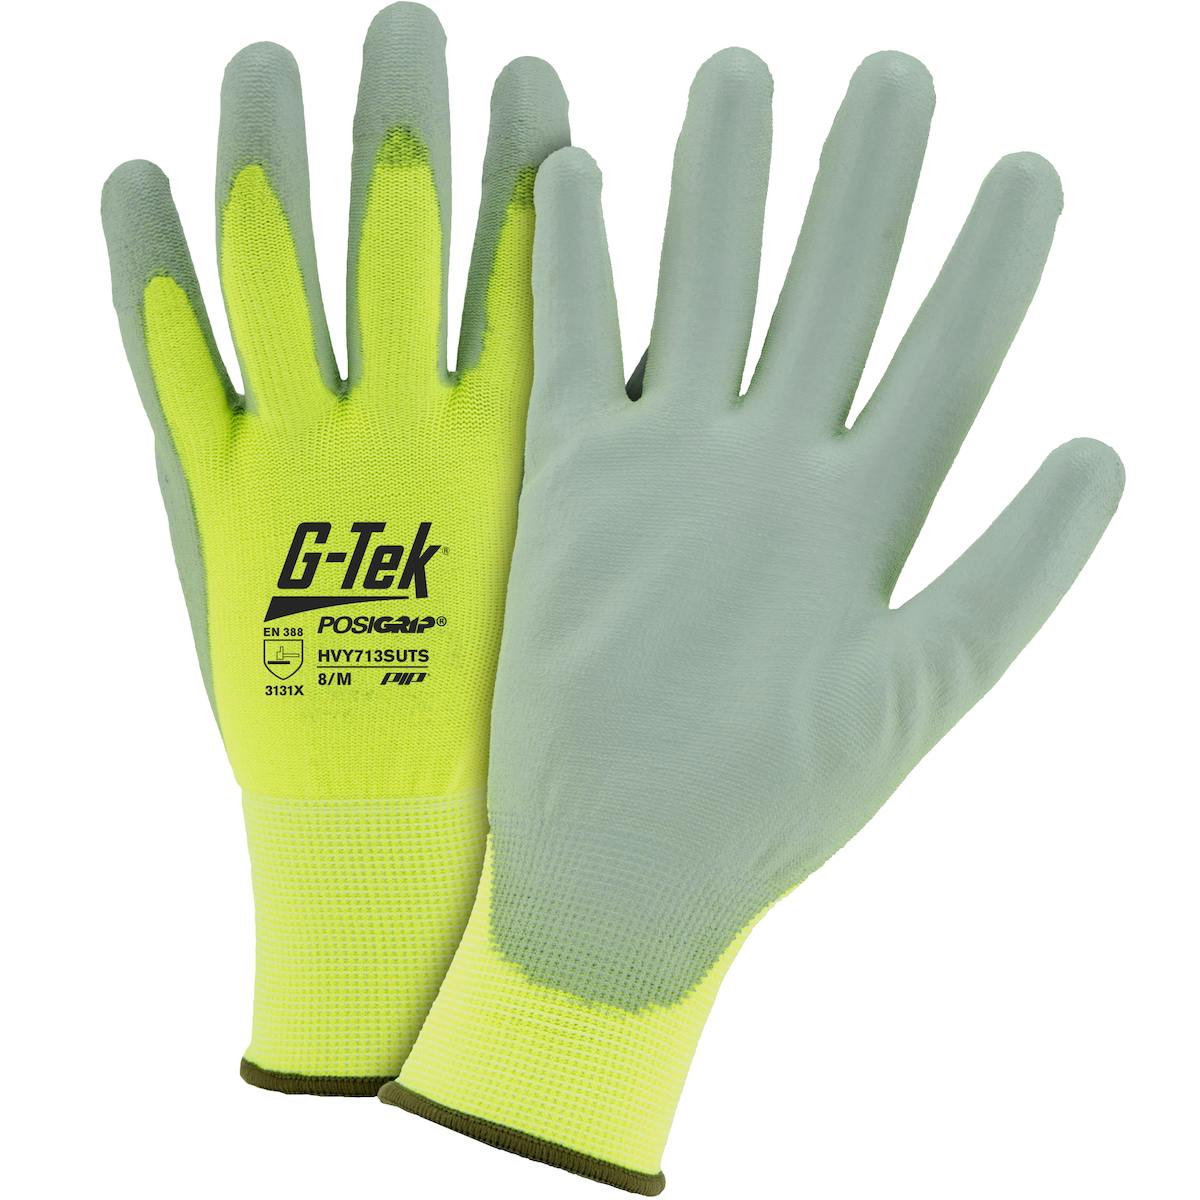 G-Tek® PosiGrip® Hi-Vis Seamless Knit Polyester Glove with Polyurethane Coated Flat Grip on Palm & Fingers - Touchscreen (HVY713SUTS)